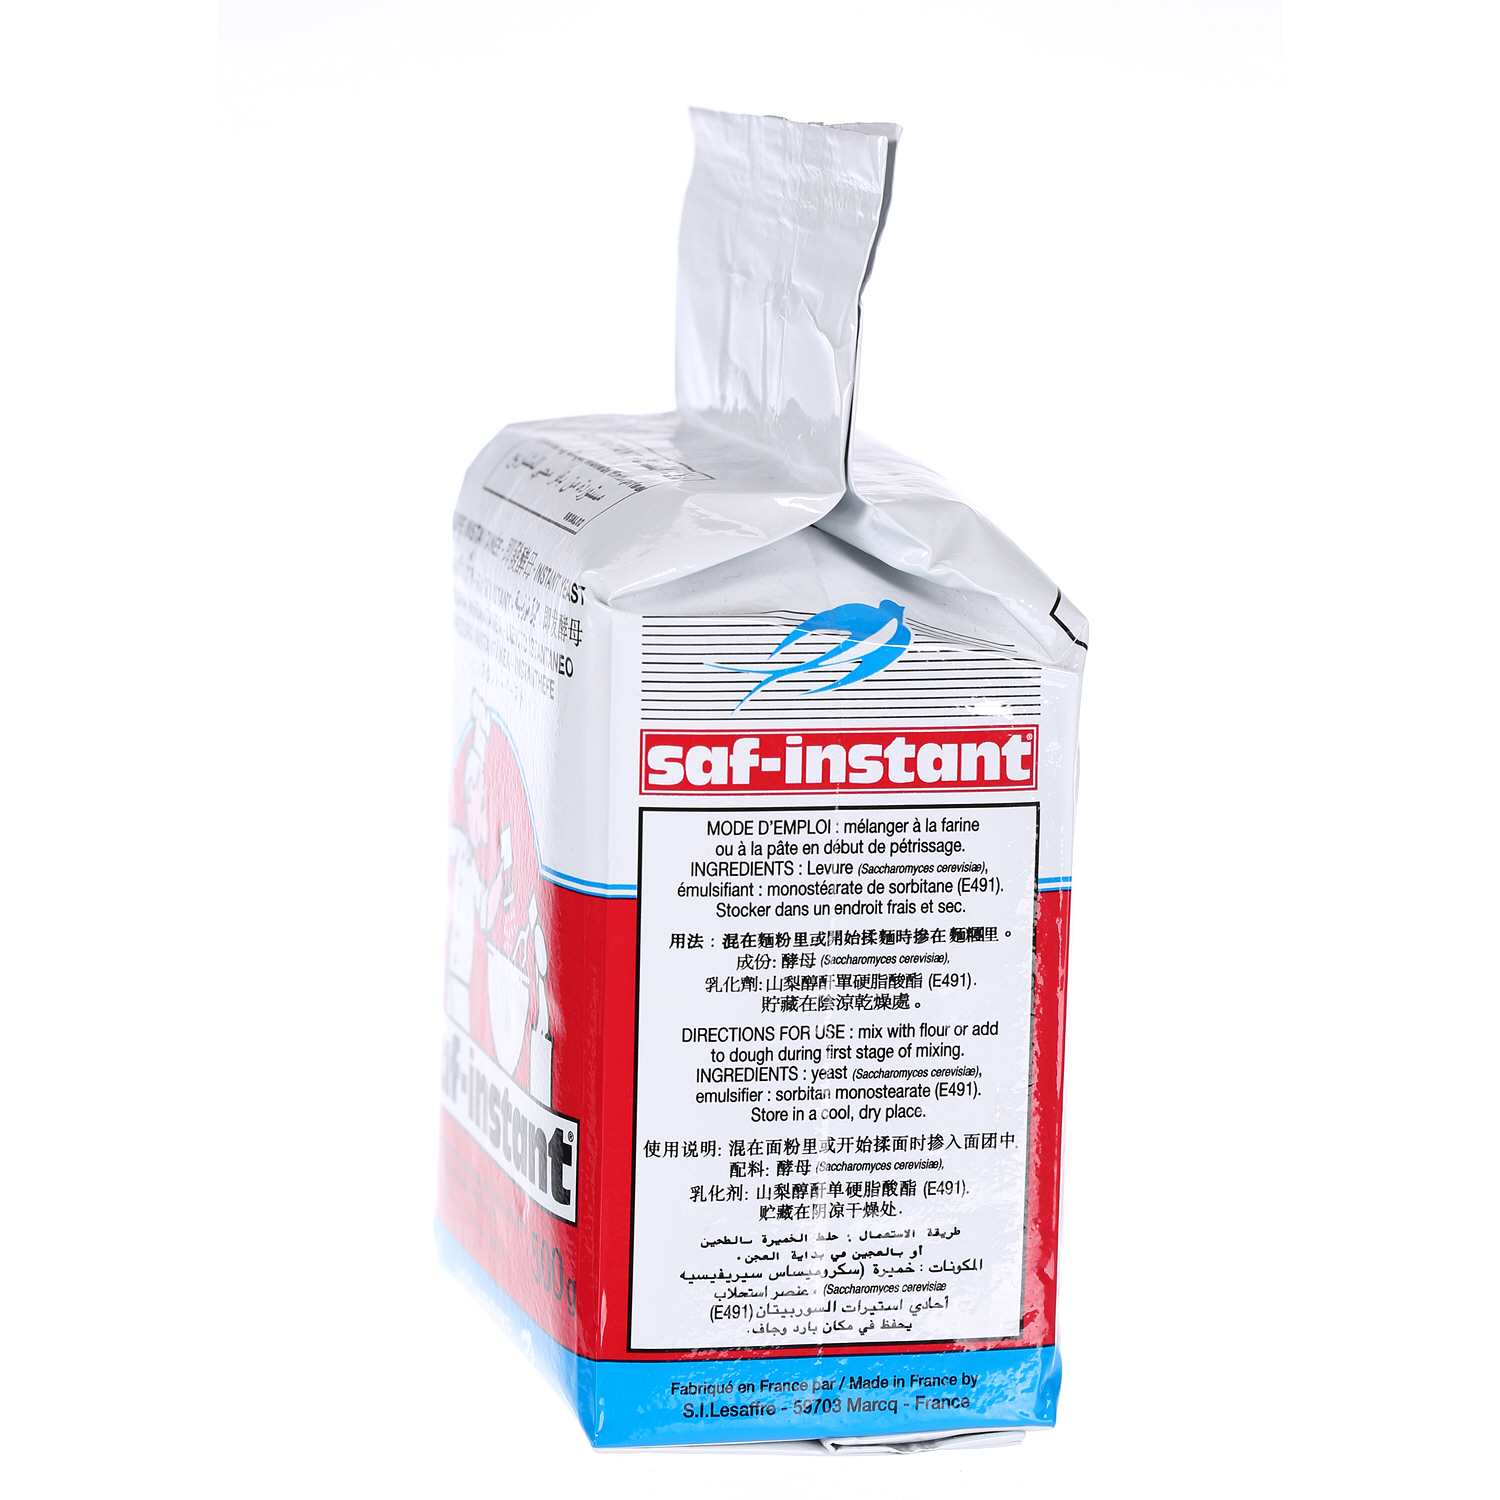 Saf-instant Yeast Faure Pack 500 g